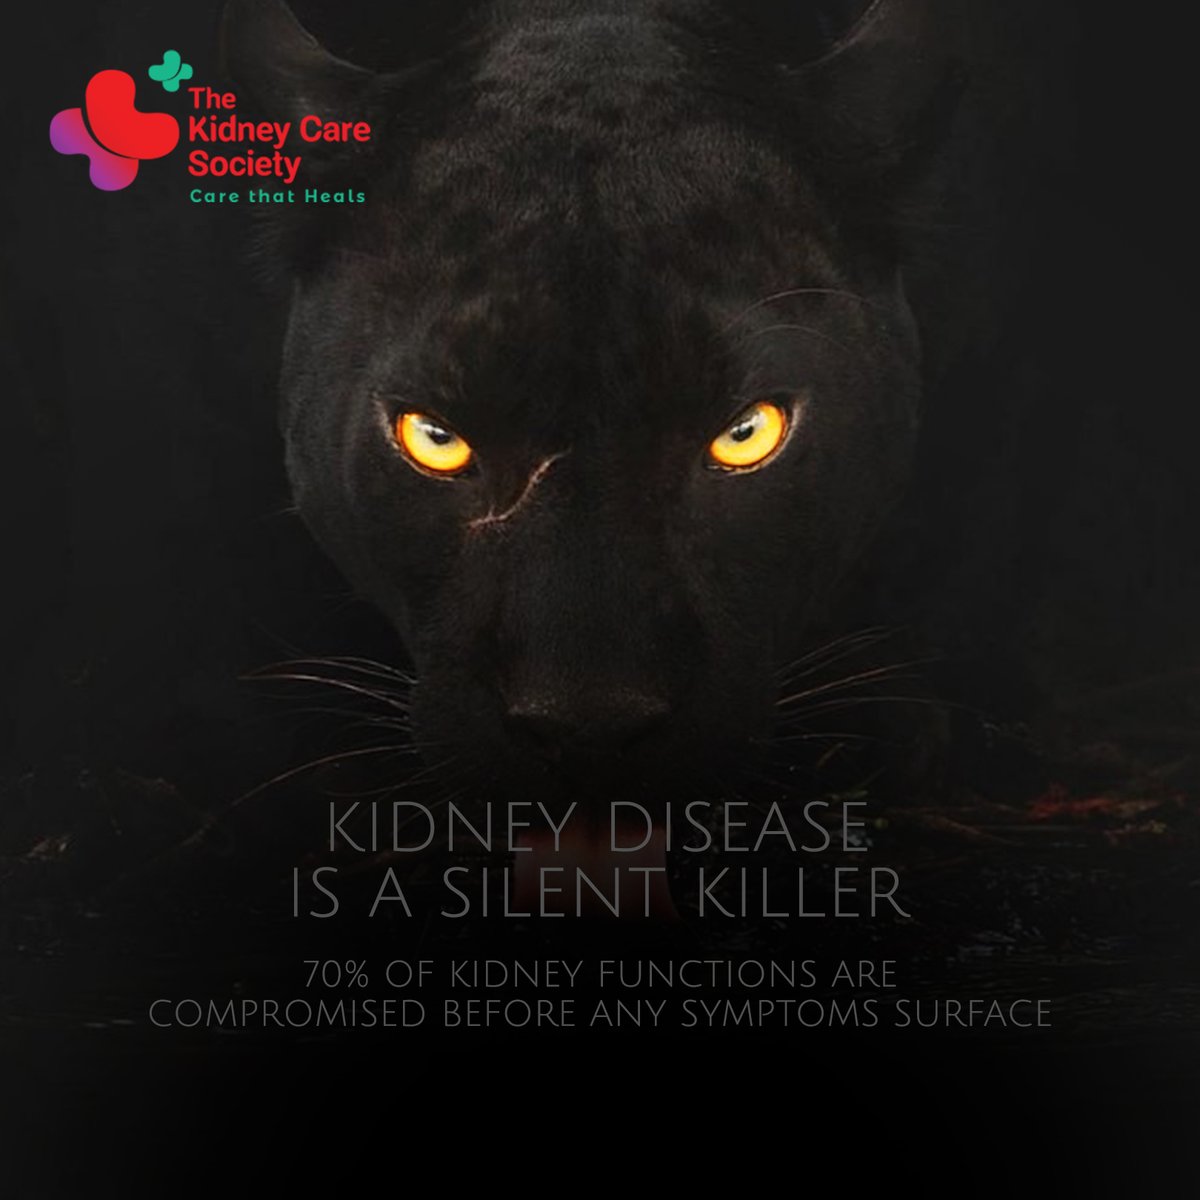 Most of the times kidney diseases have no symptoms.  Get your and your families kidney function checked today. Stay safe, stay protected.

#SilentKiller #KidneyCare #KidneyDiseases #KidneyDiseaseSymptoms #KidneyHealth